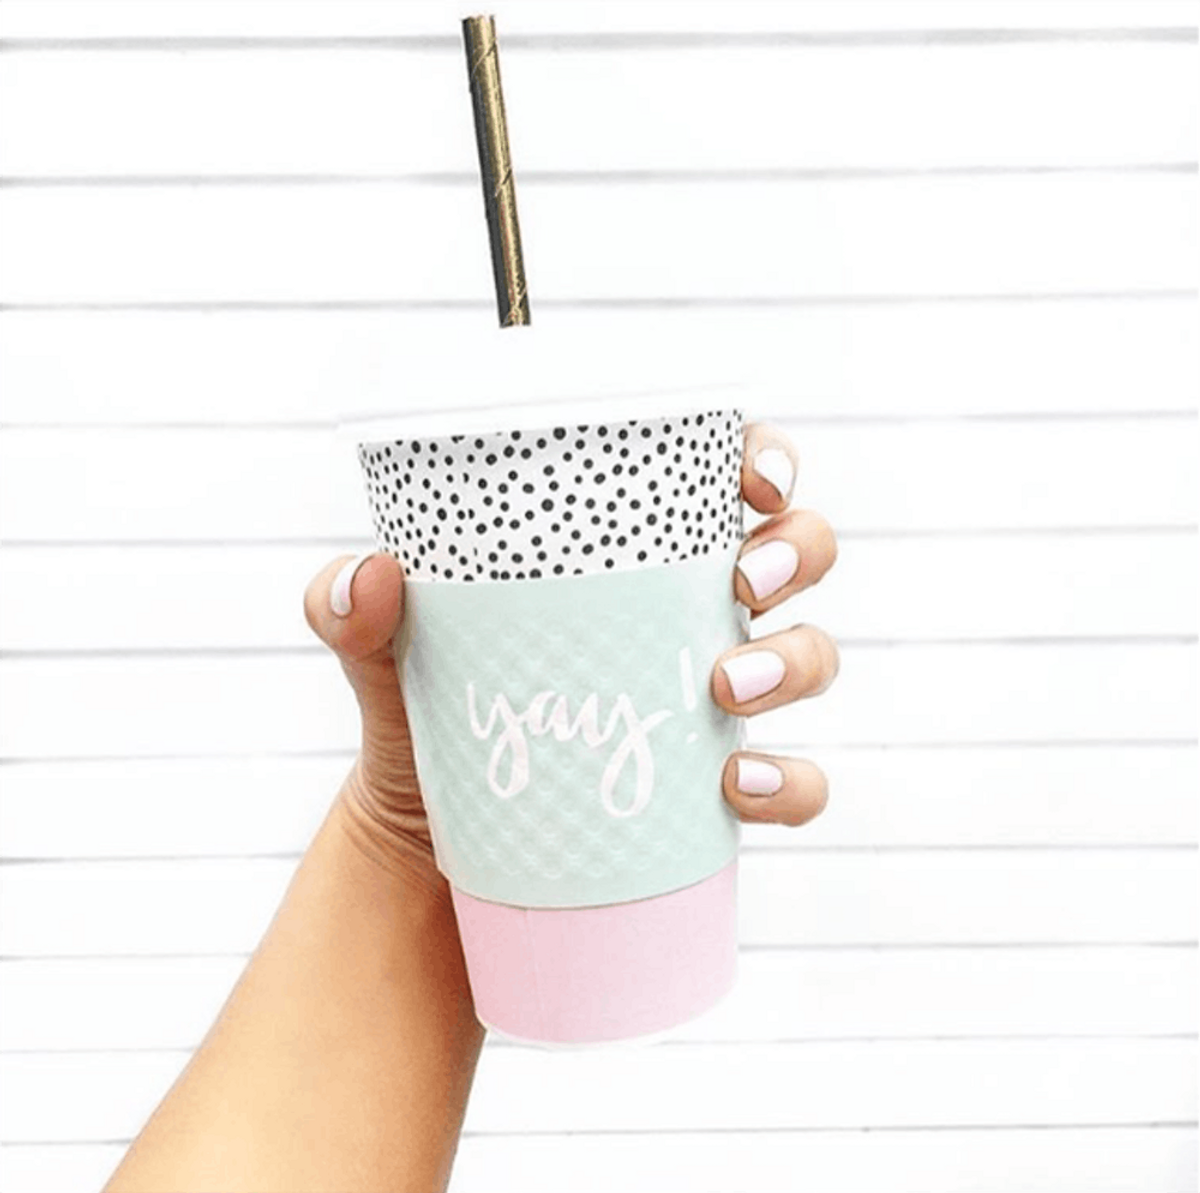 These Instababes’ Preppy Nails Will Inspire Your Next Mani